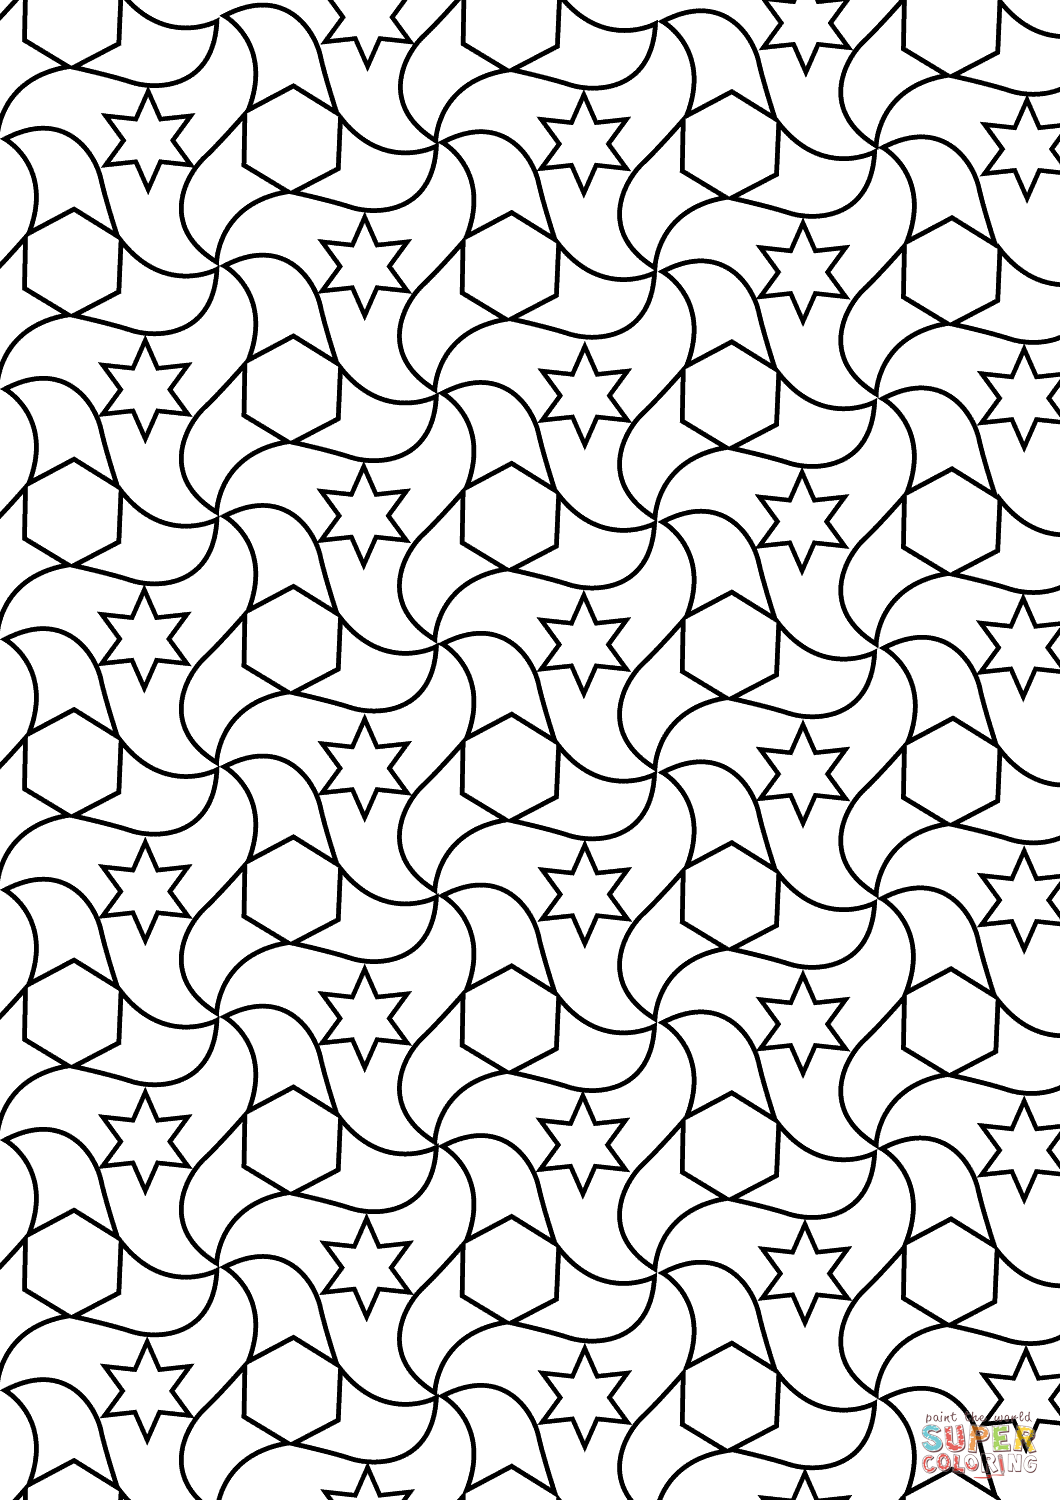 Tessellation Coloring Pages Free Printable at Free